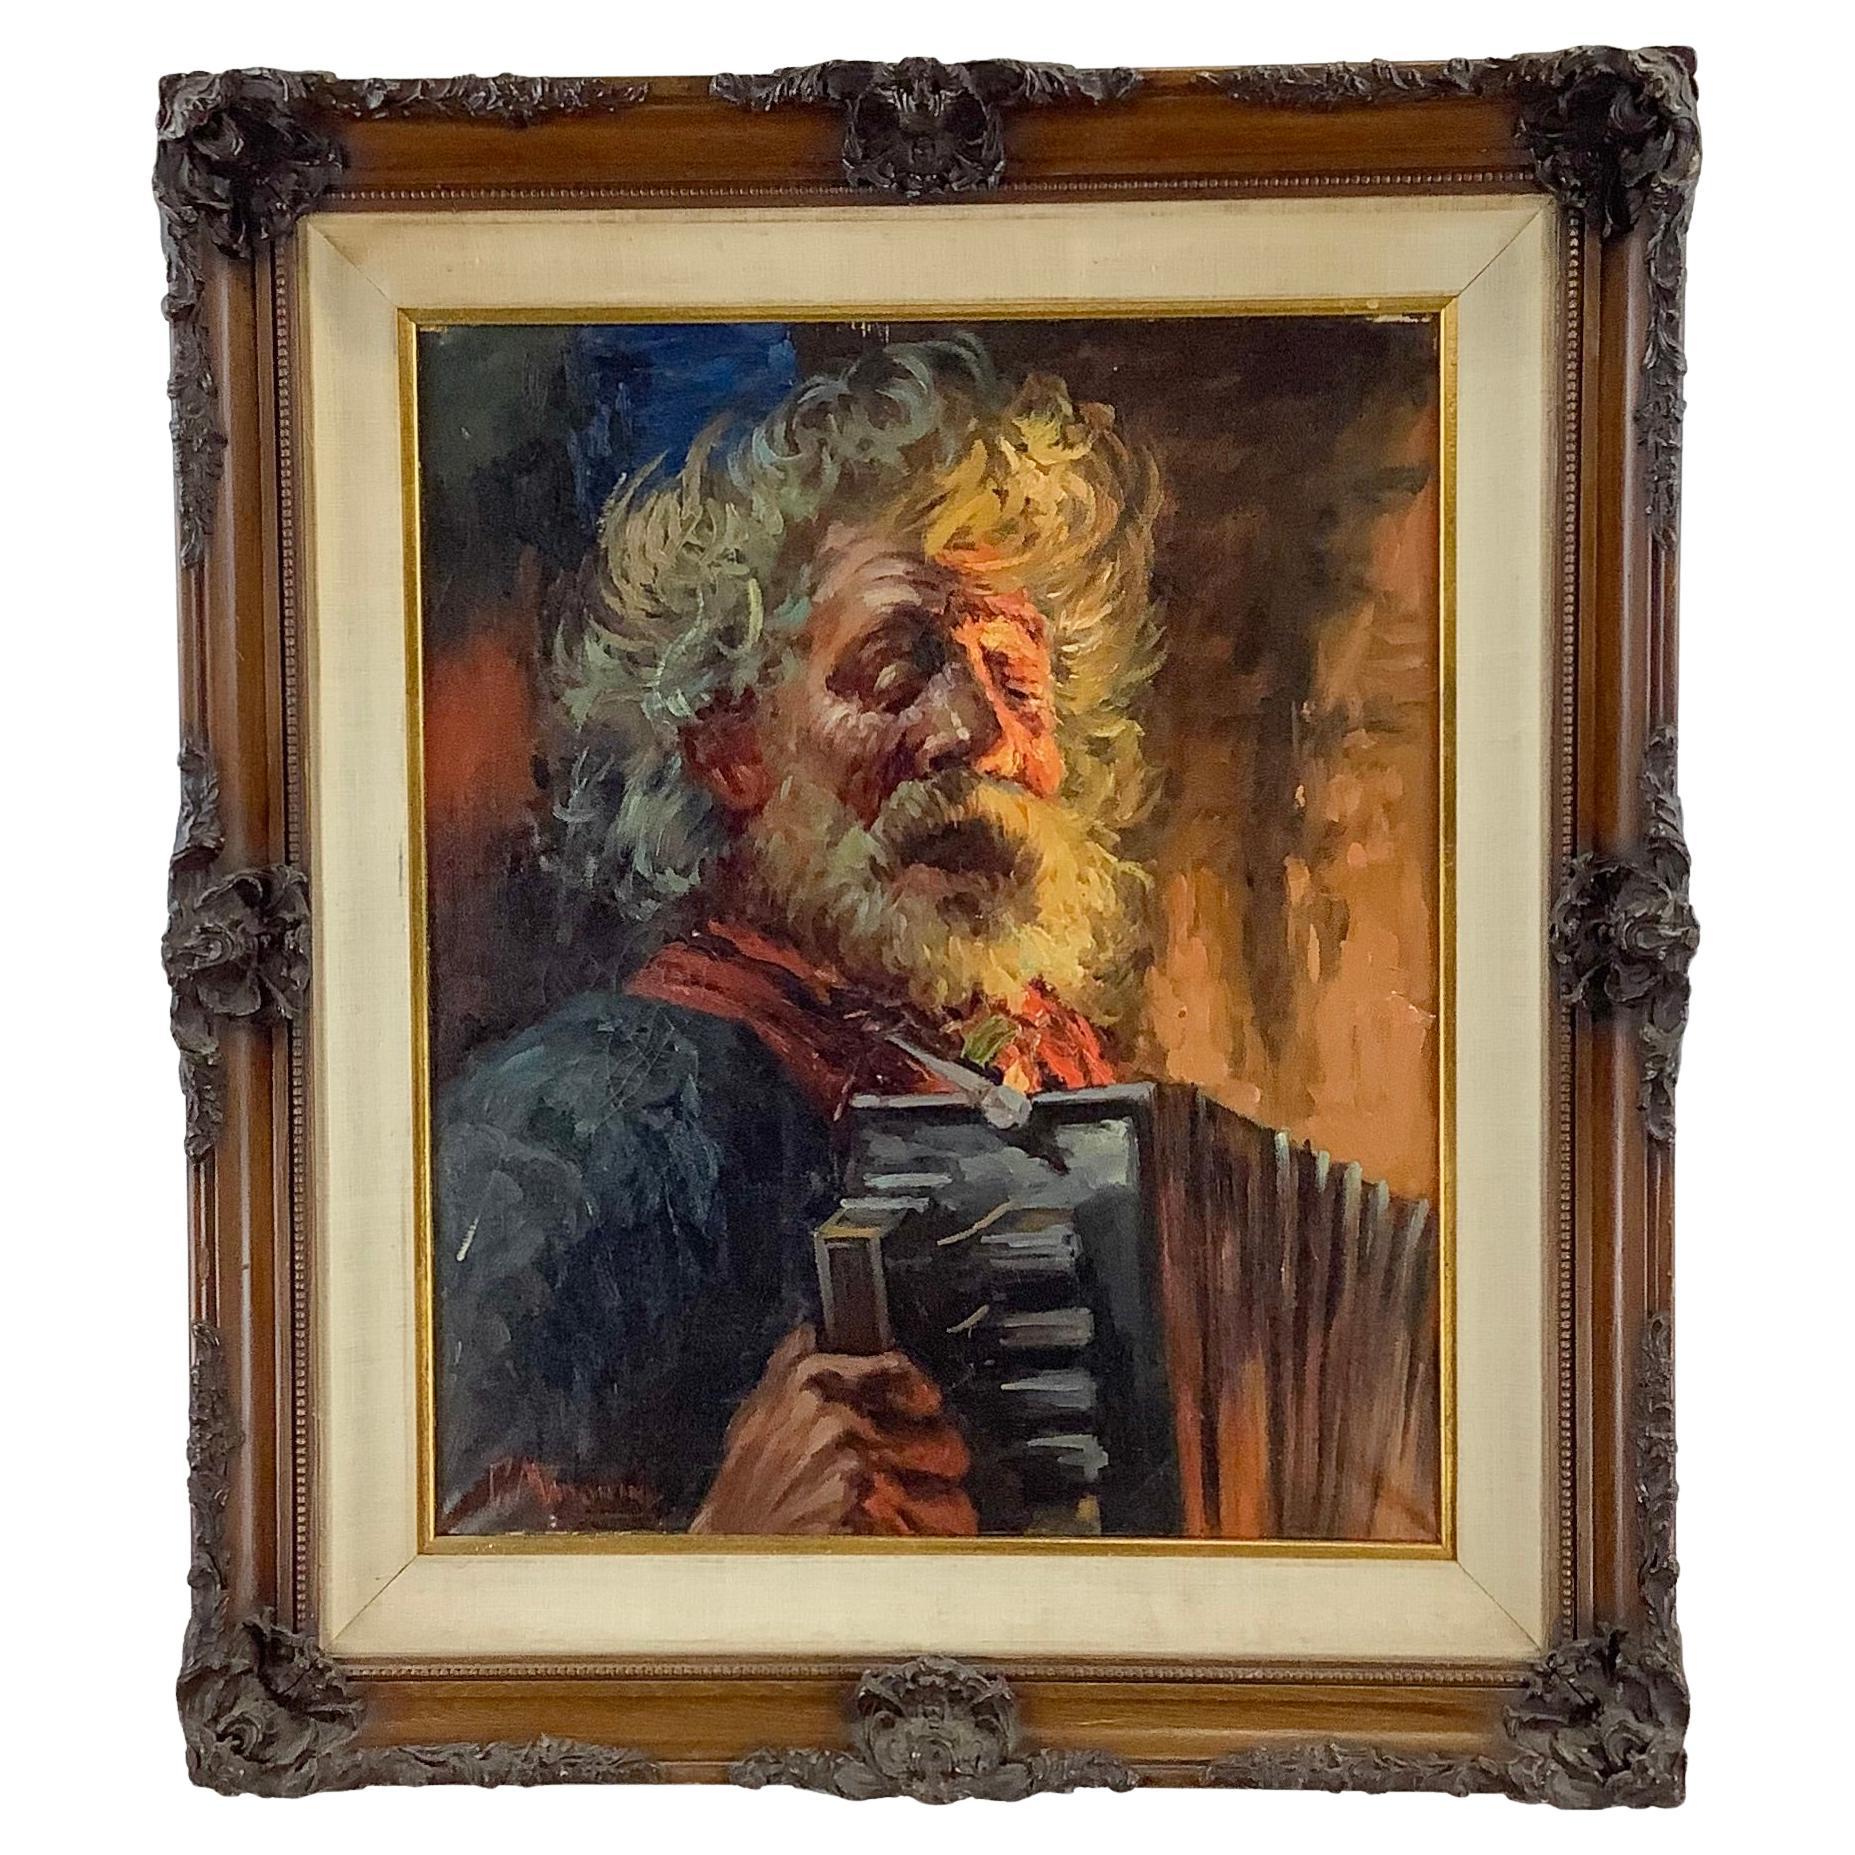 Vintage "Accordion Player" Oil on Canvas Impressionist Painting by G. Madonini